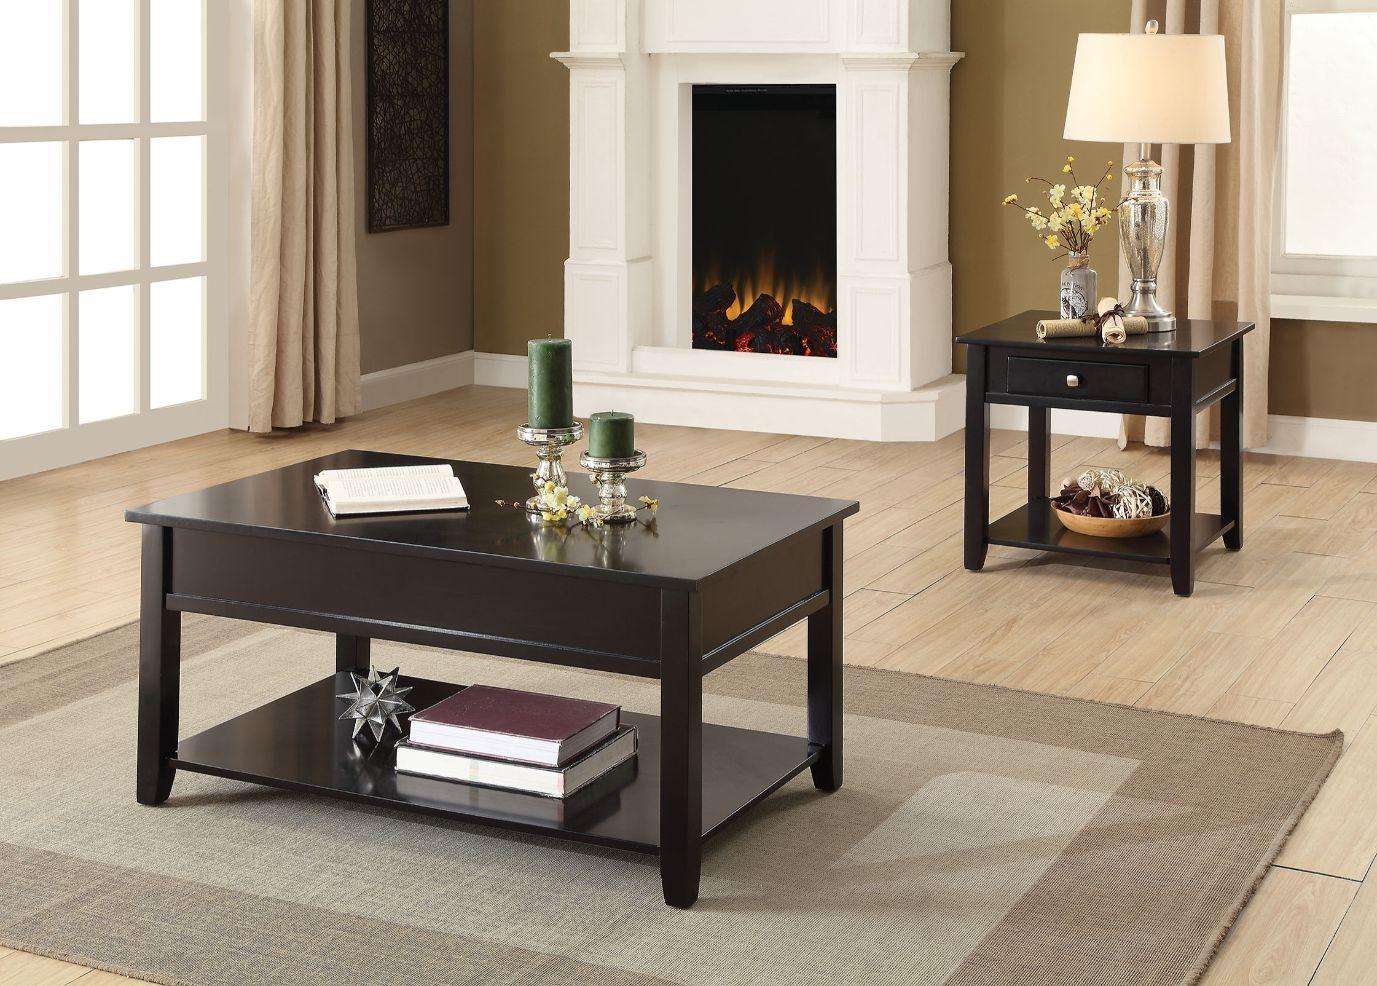 

    
Rustic Wood Black Coffee Table + 2 End Tables by Acme Malachi 82950-3pcs
